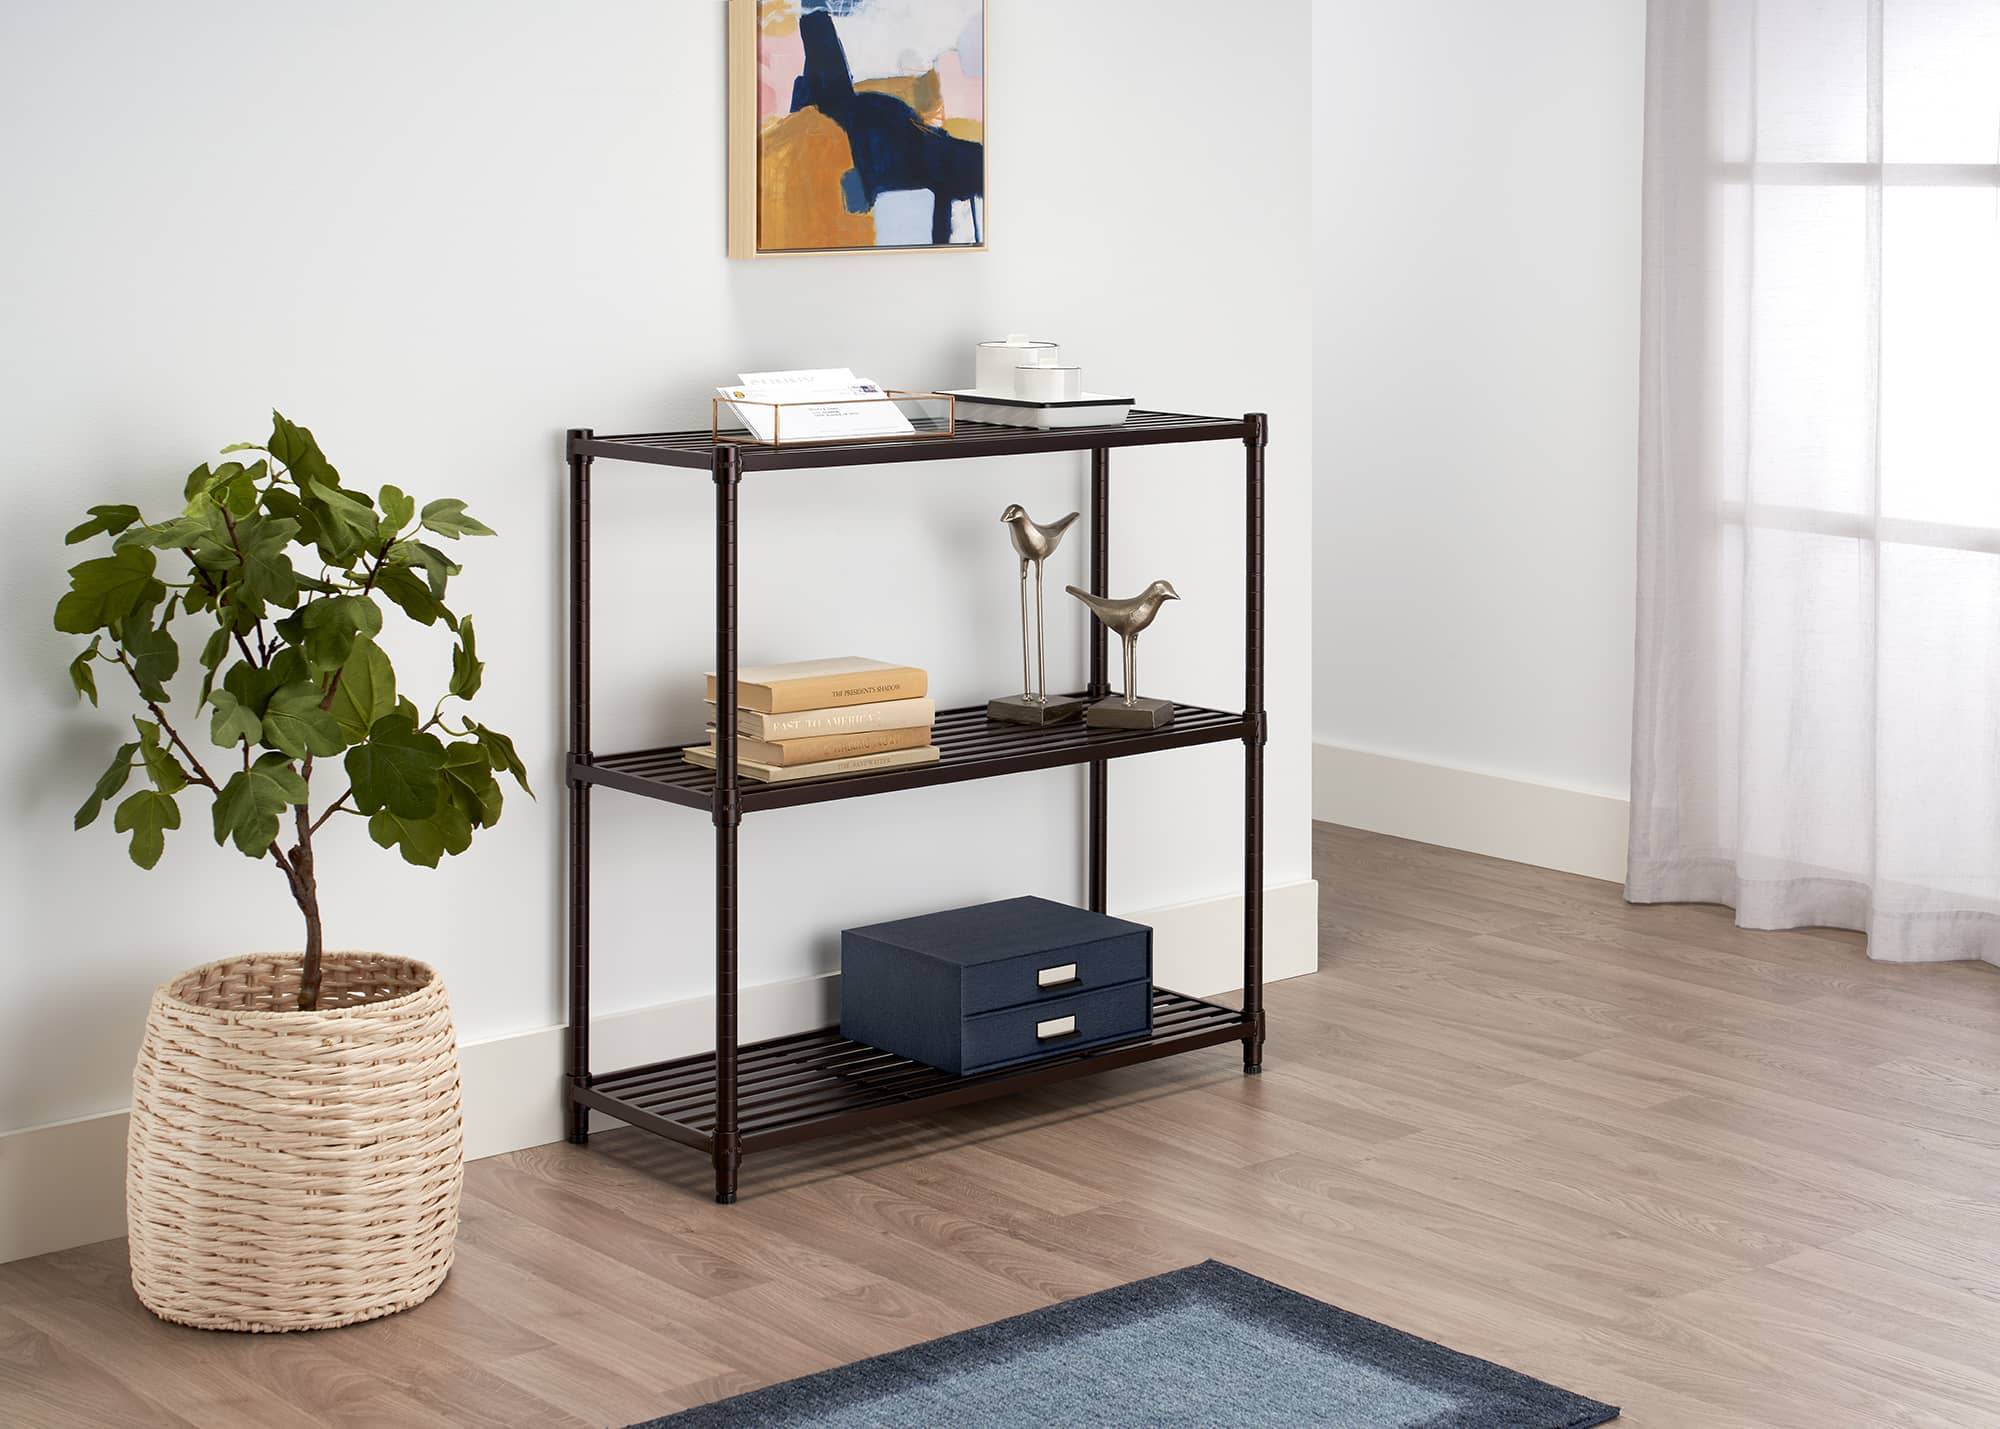 3 tier slat shelf used as console table in a living room